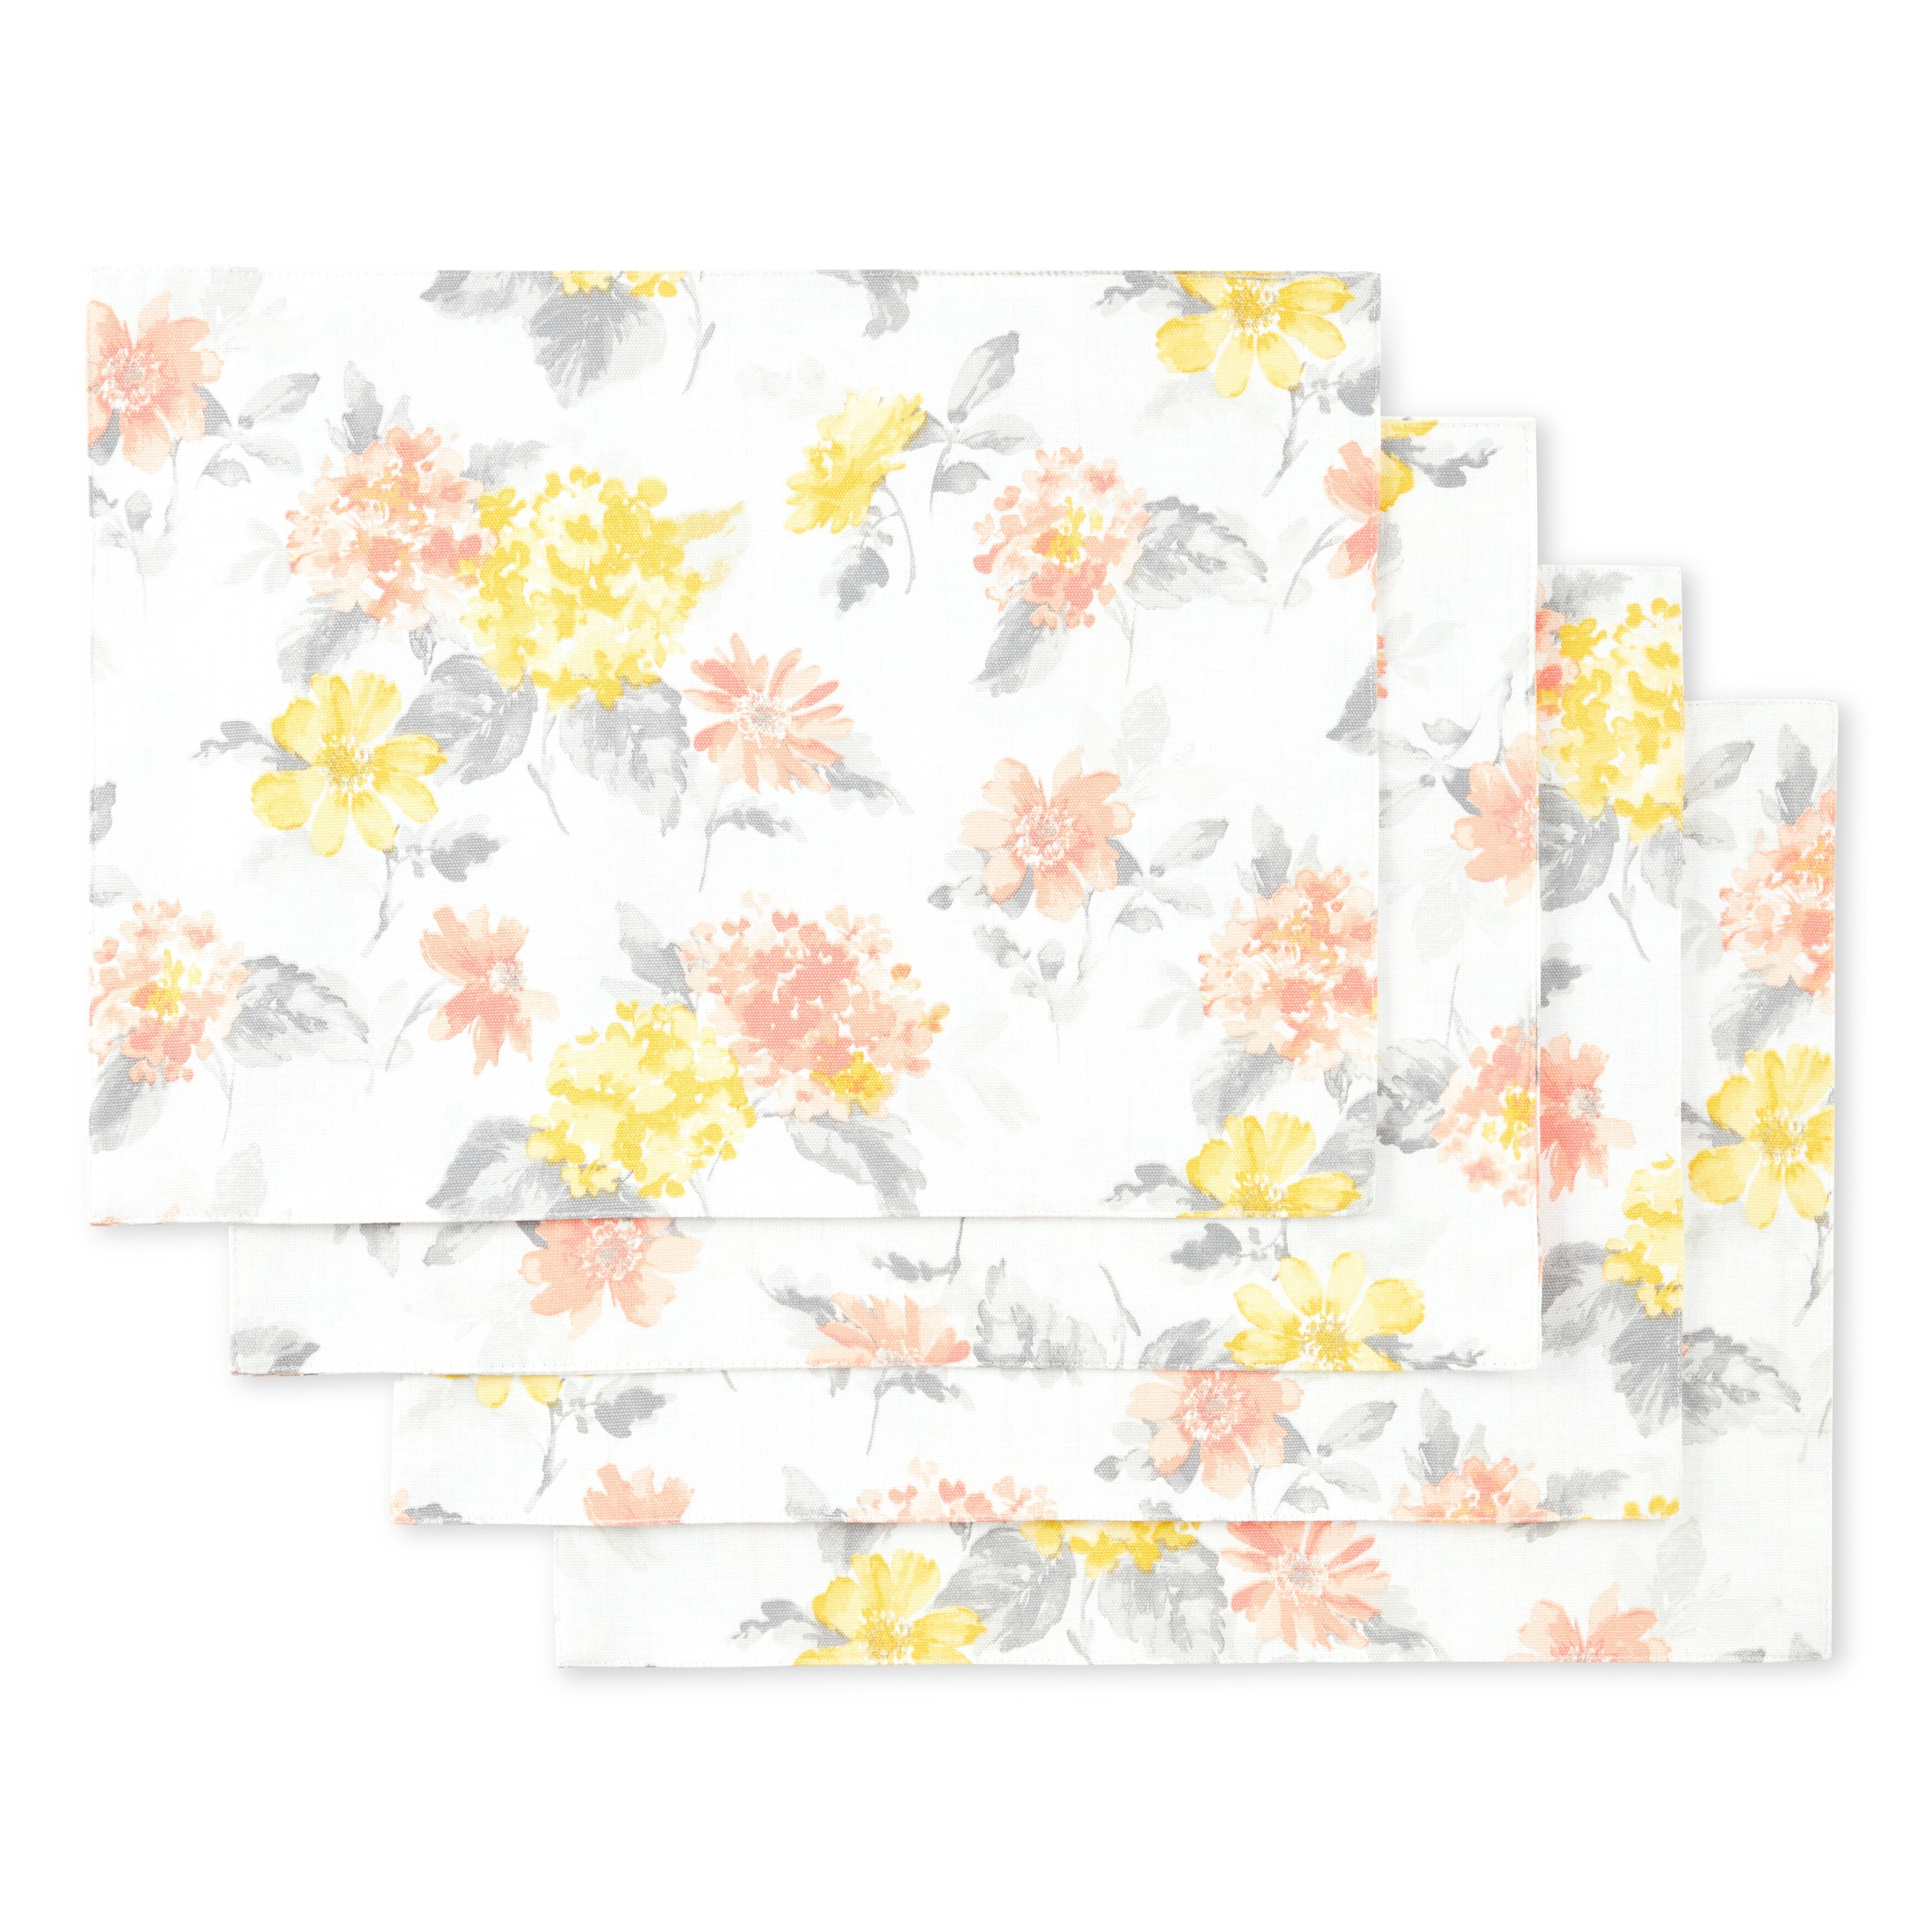 https://ak1.ostkcdn.com/images/products/is/images/direct/4a688aa8be627dd2598cdbd318a3a3e2baec6046/Martha-Stewart-Amber-Floral-Placemat-Set-4-Pack.jpg